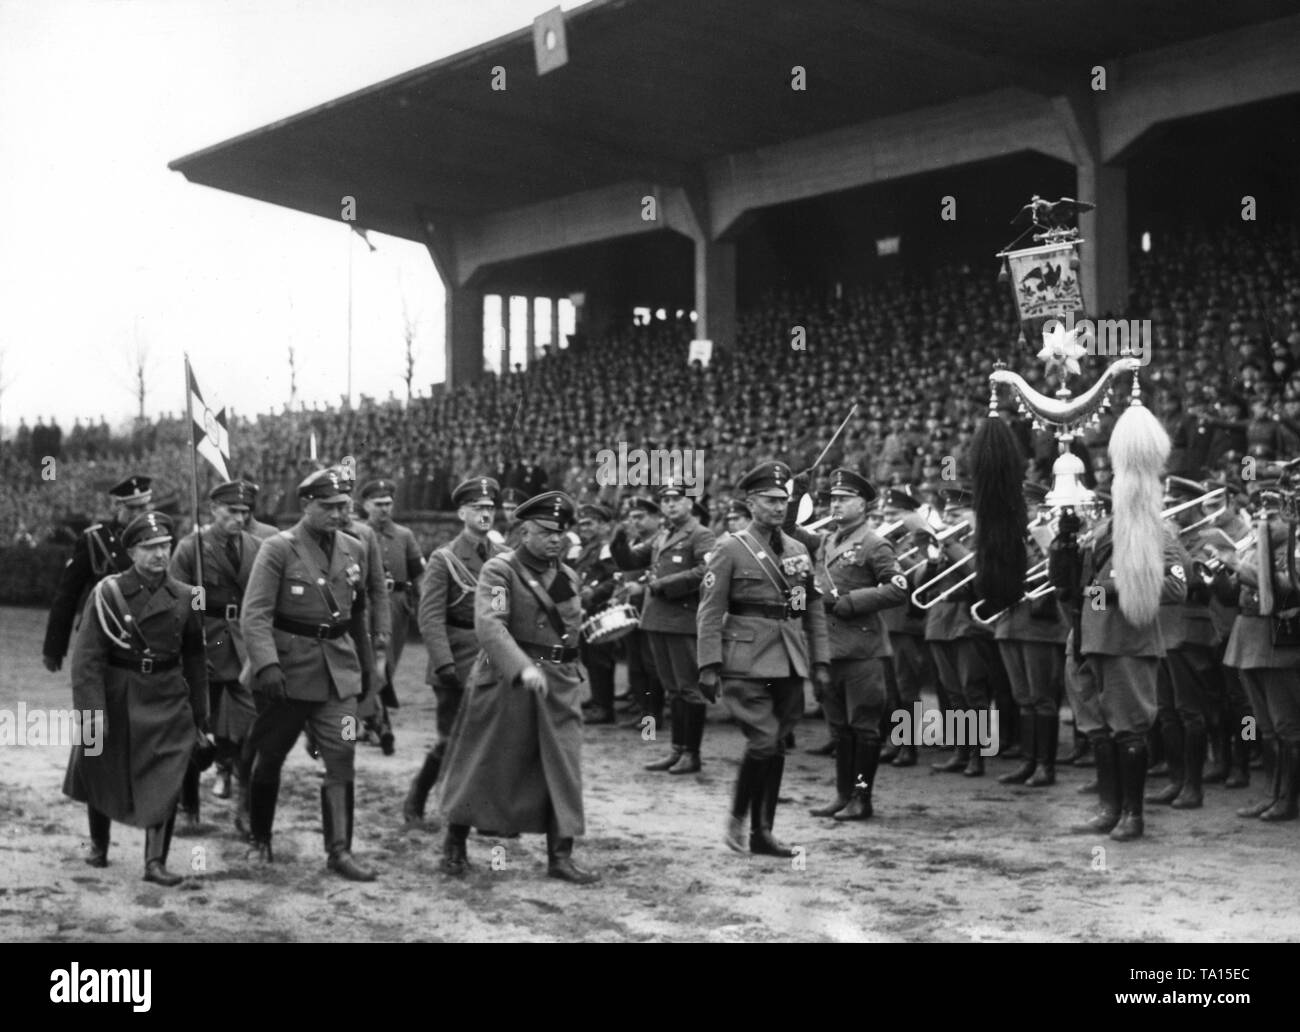 Rally of the Stahlhelm in a stadium. On the right, a standard and a music band. Stock Photo